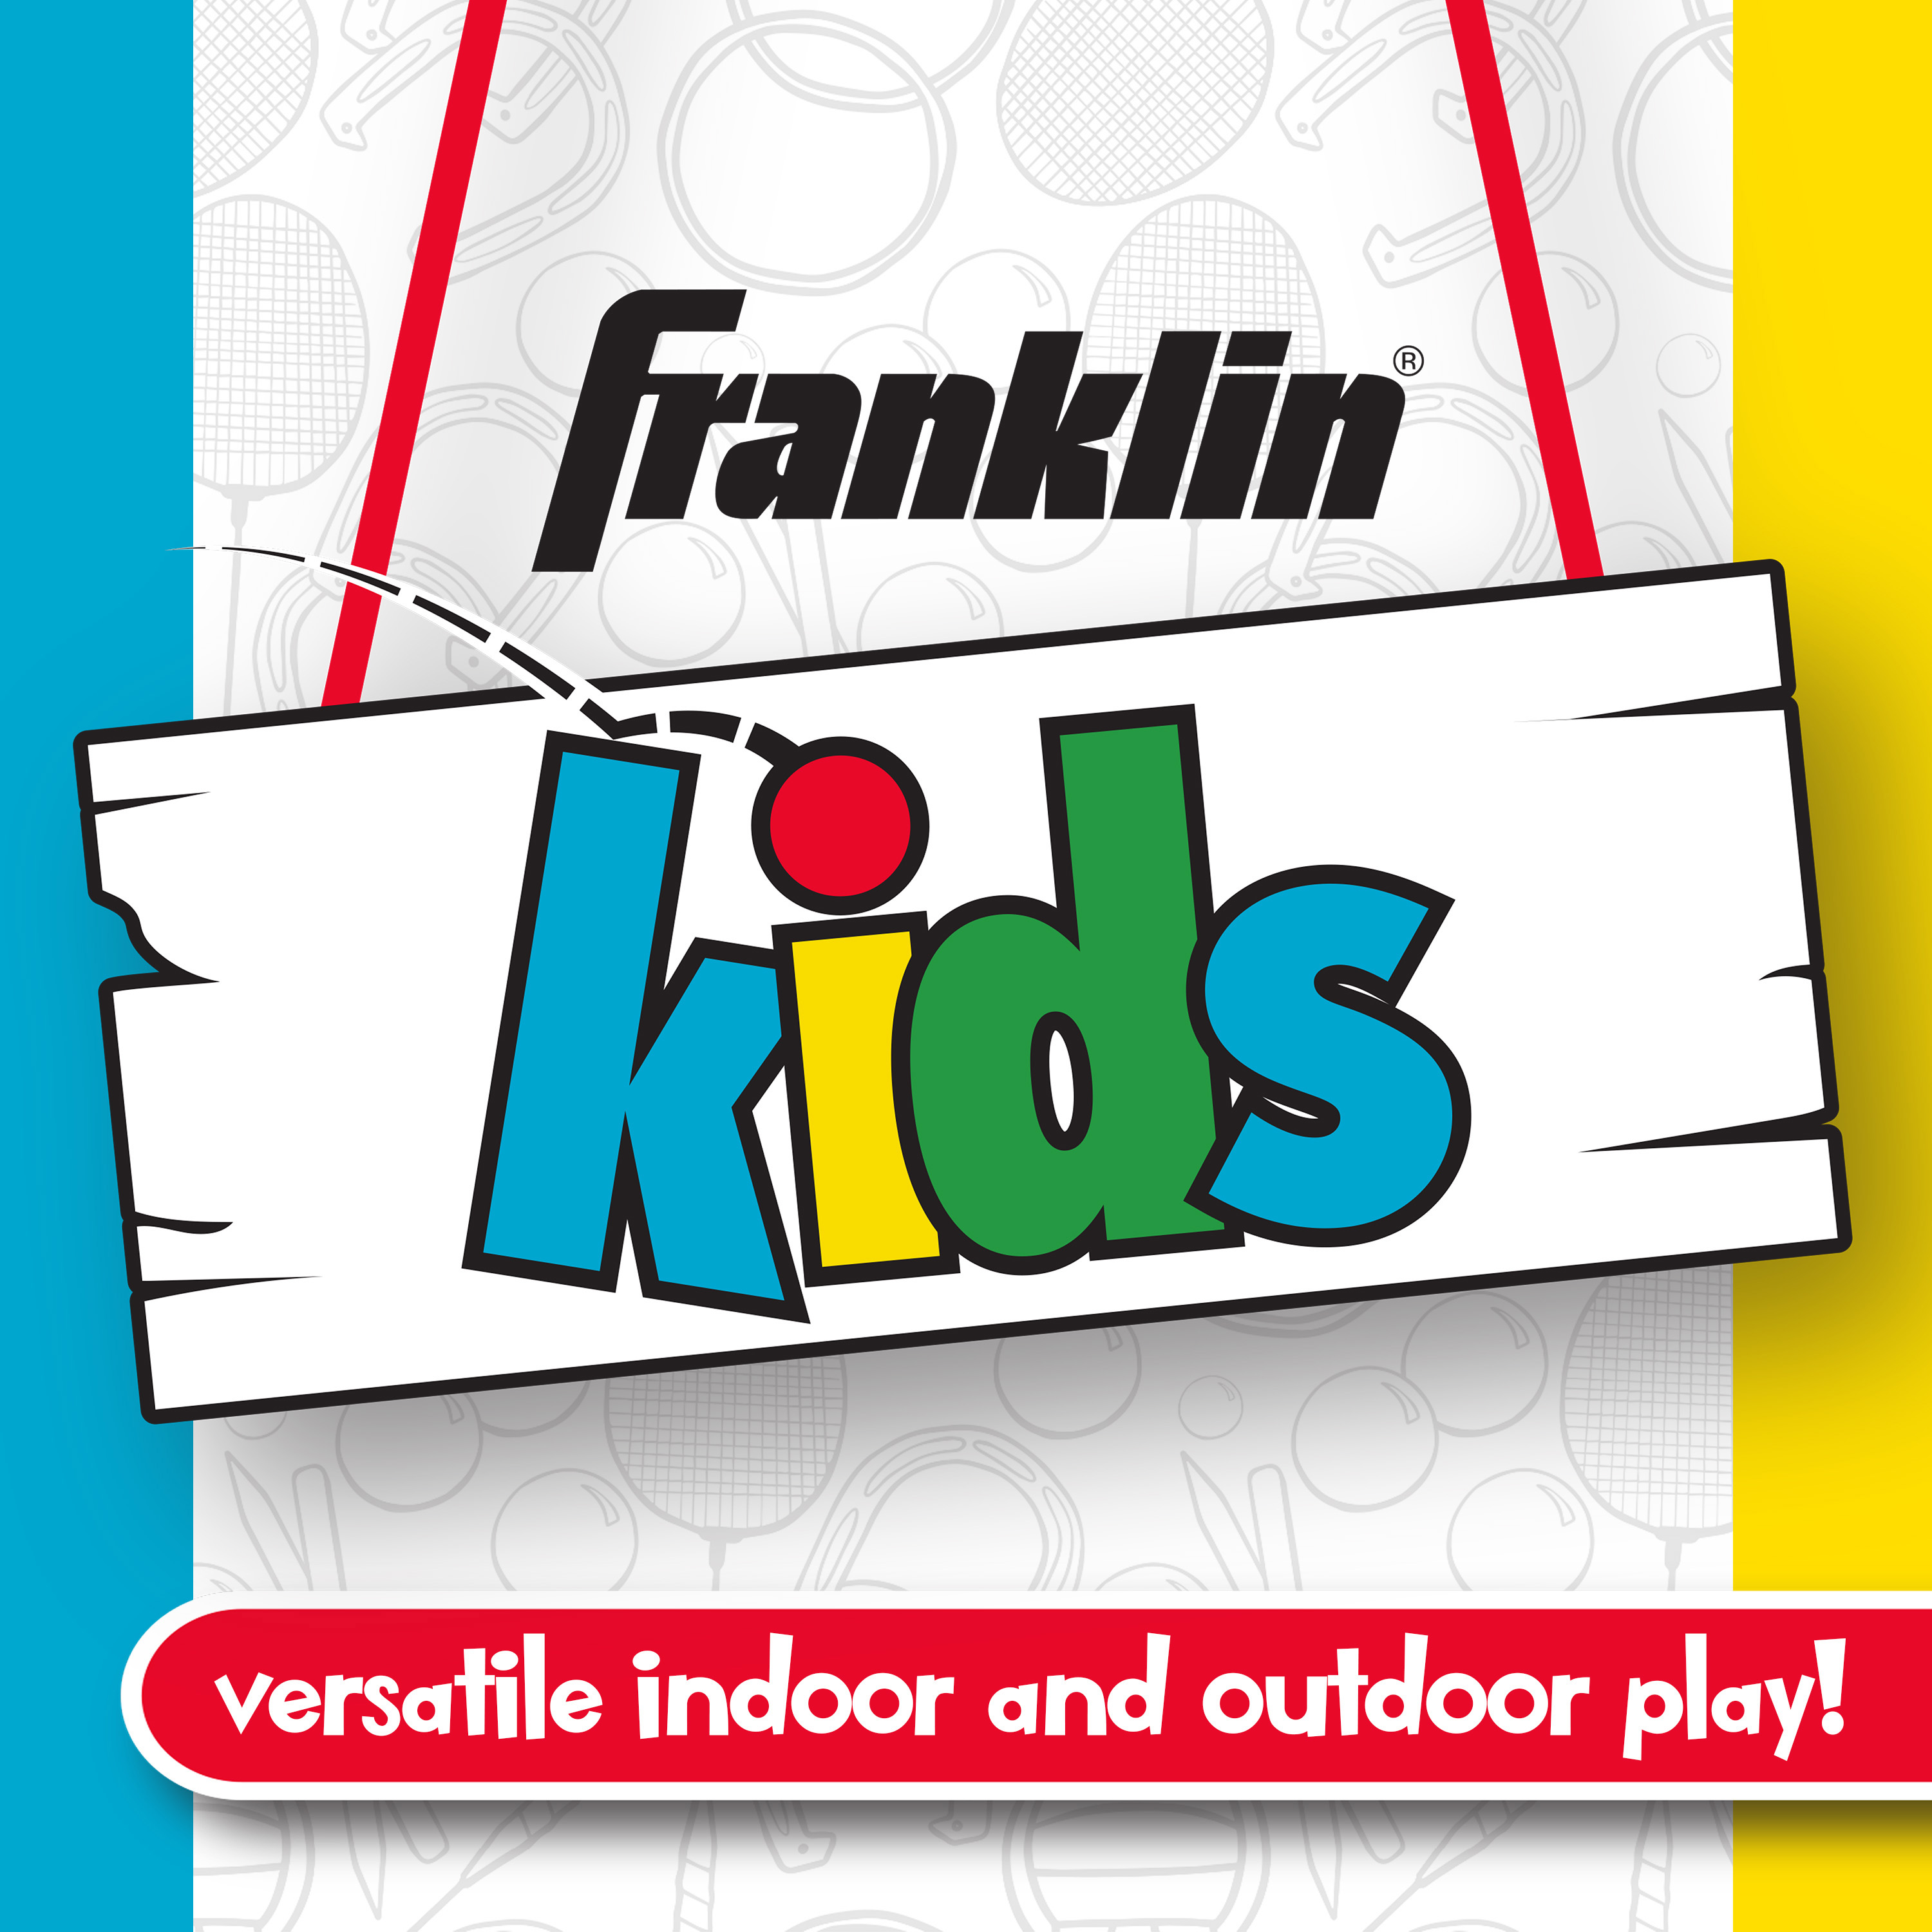 Franklin Sports Kids Bean Bag Toss - Great for Kids-Indoor Outdoor Use - Includes 31" x 33" Target and (6) 4" Bean Bags - image 7 of 7